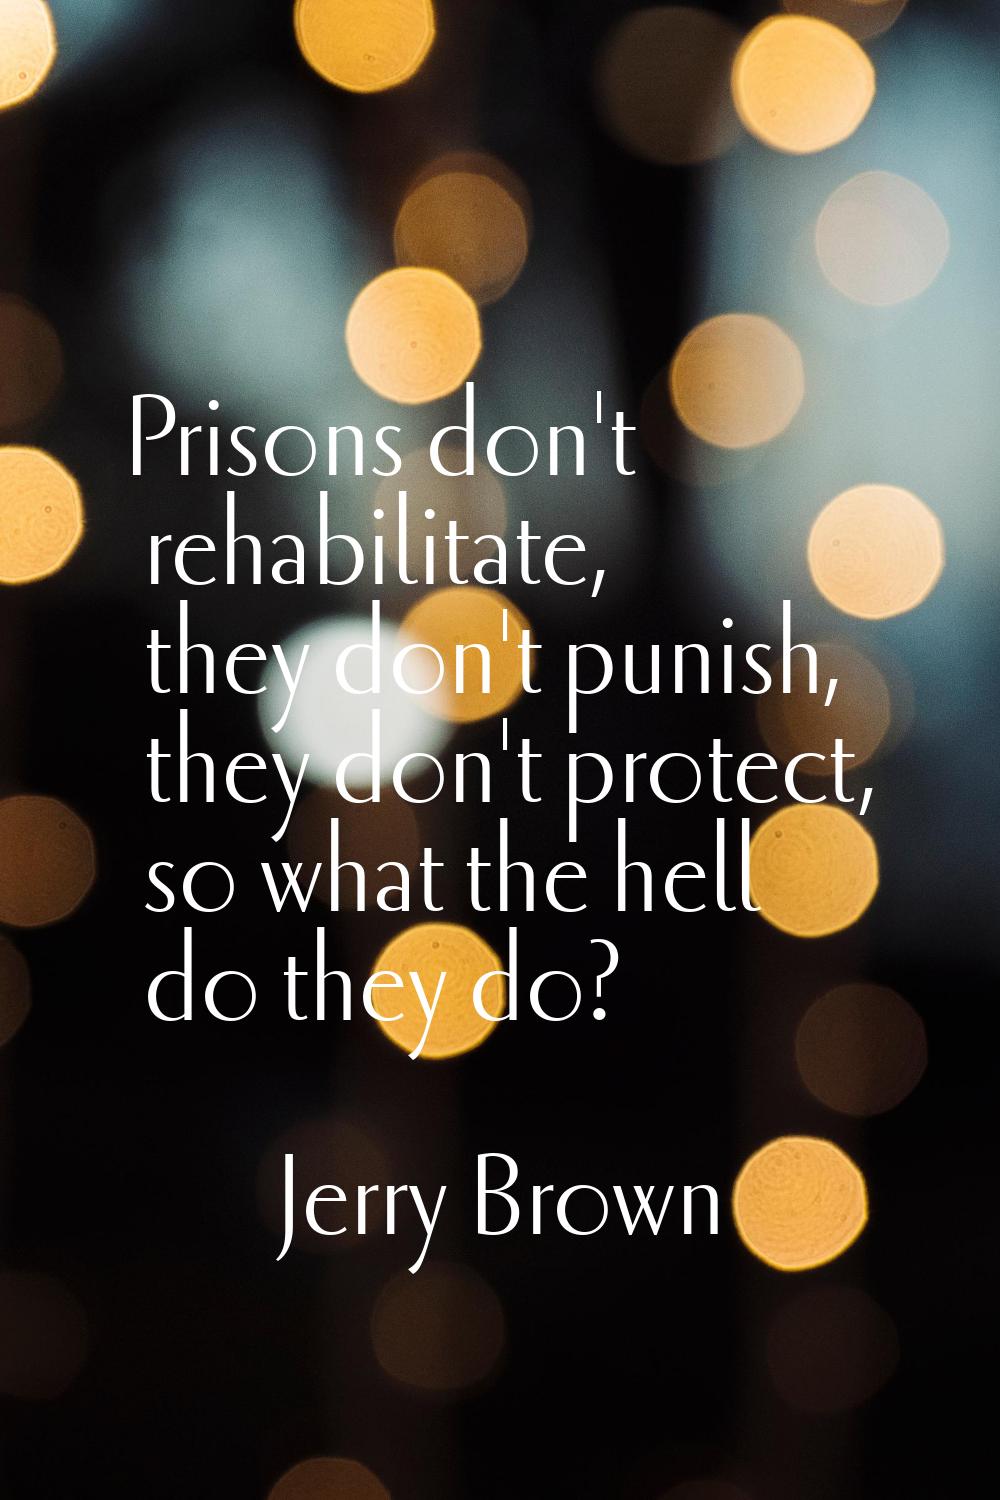 Prisons don't rehabilitate, they don't punish, they don't protect, so what the hell do they do?